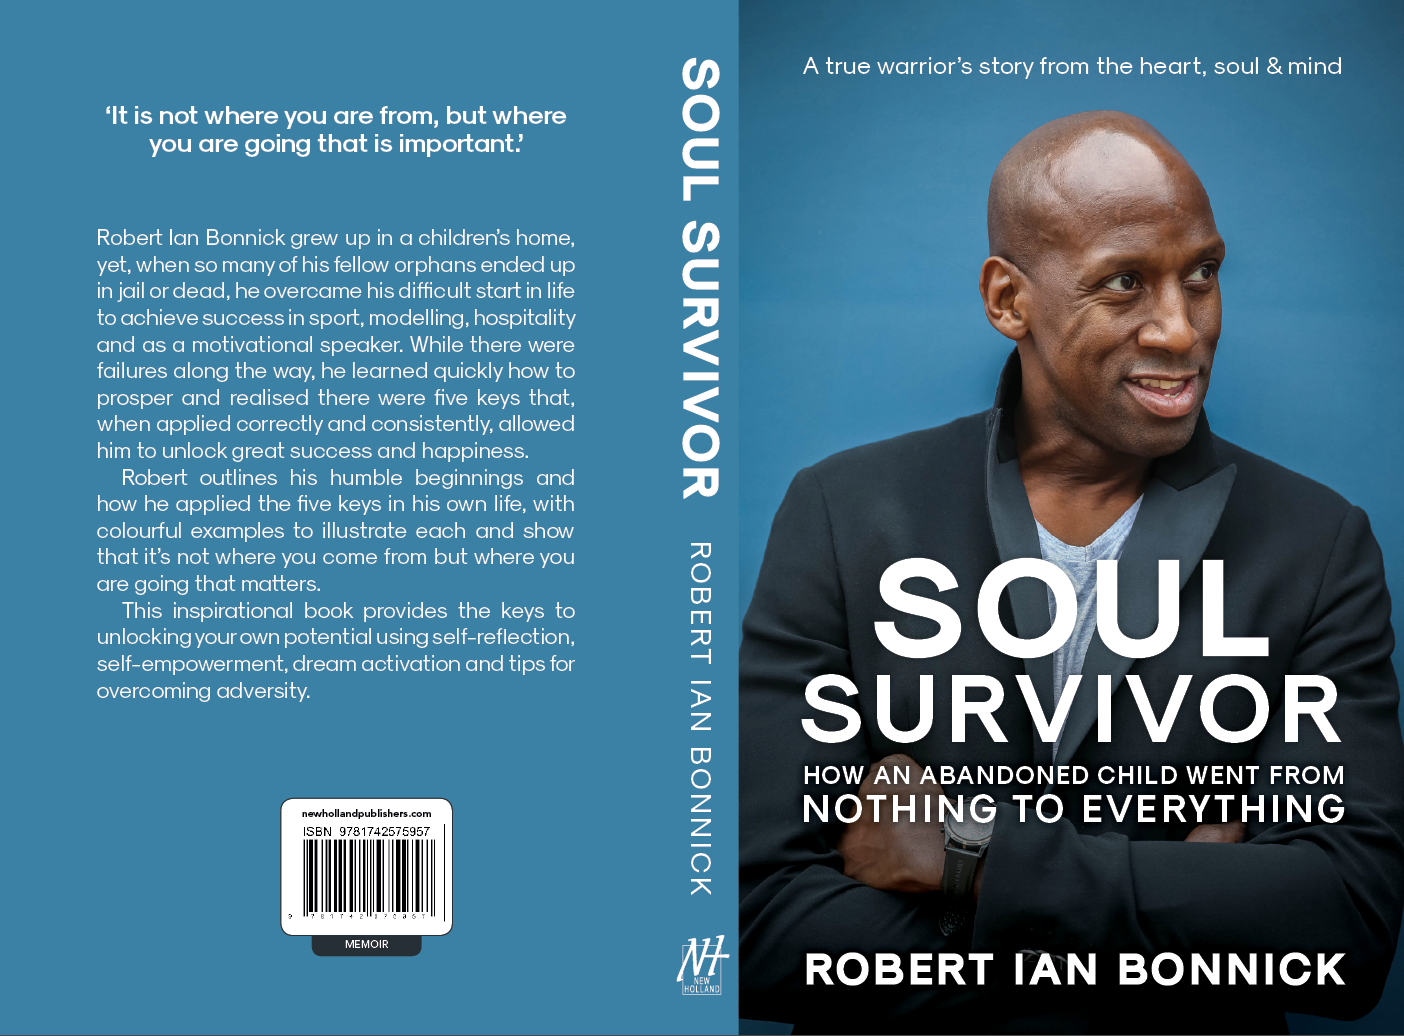 Soul Survivor, Episode #1101 The Power Of Your Story, Interview with Robert Ian Bonnick, book proposals, submit, submissions, agents, publishers, Publishing, Writing Journey, Book Marketing, Social Media, LinkedIn, Facebook, Pinterest, Instagram, Twitter, Marketing my book, How to grow Platform, Platform, How do I write a book, Book Coach, Writing Coach, Editor, Writing, Book, blogging, Editing, how to start a book , The Write Coach 